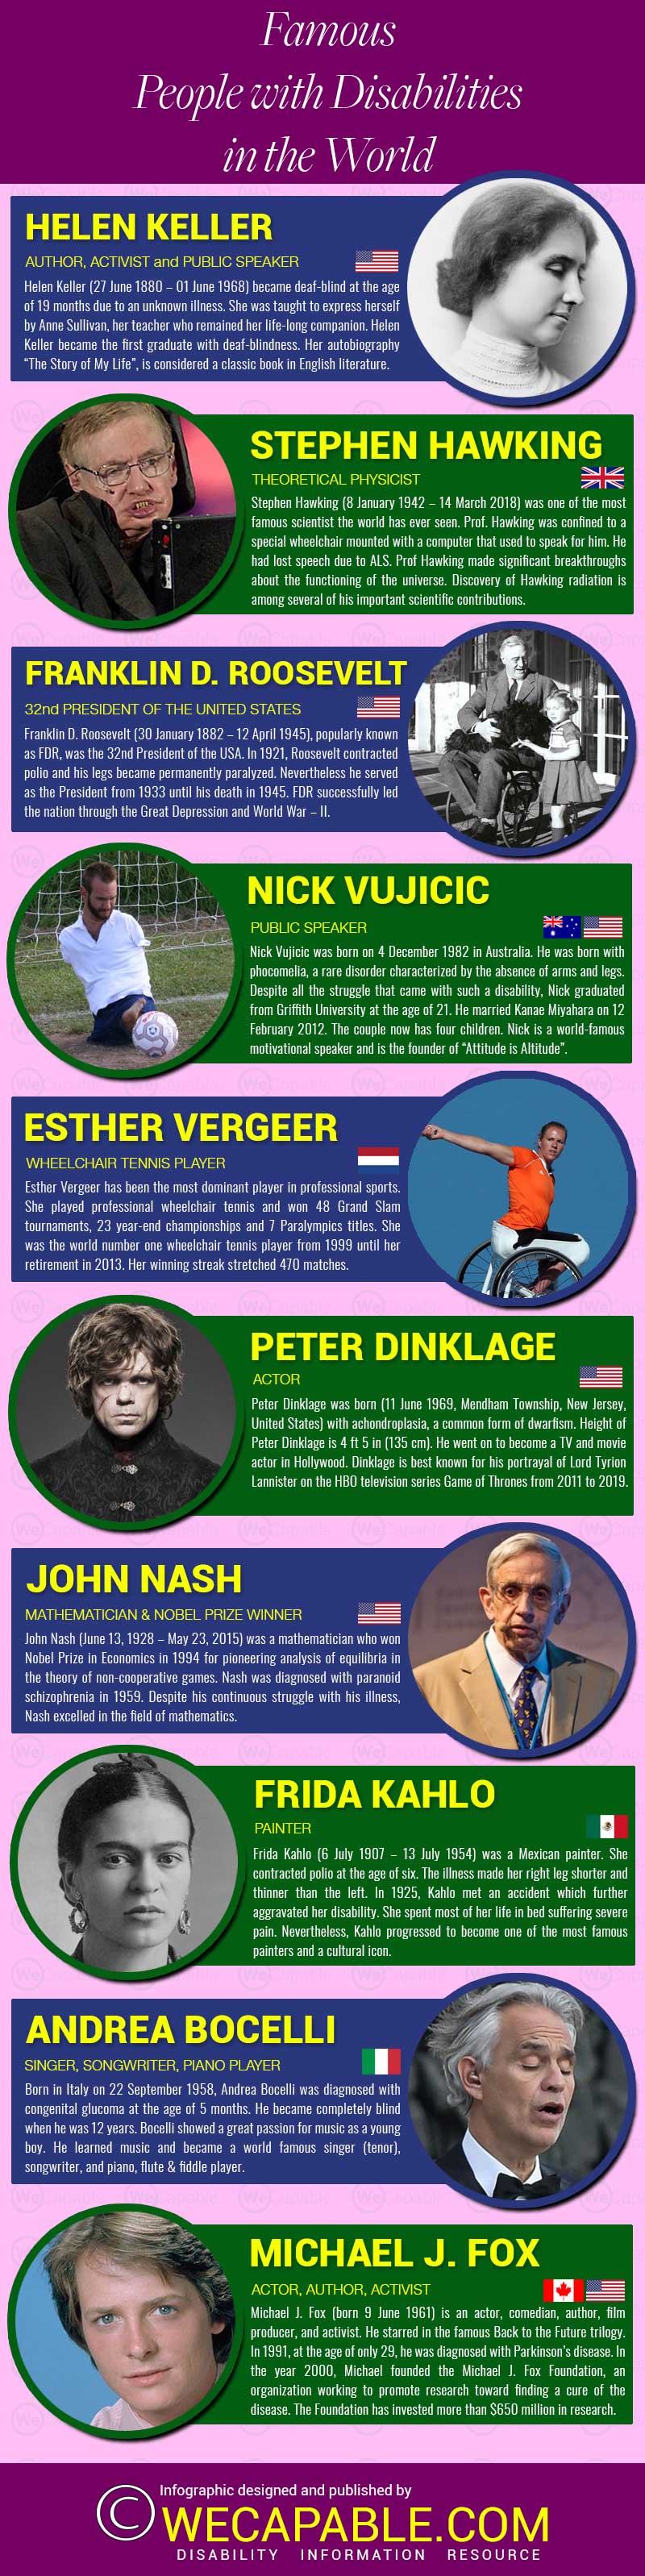 World Famous People with Disabilities